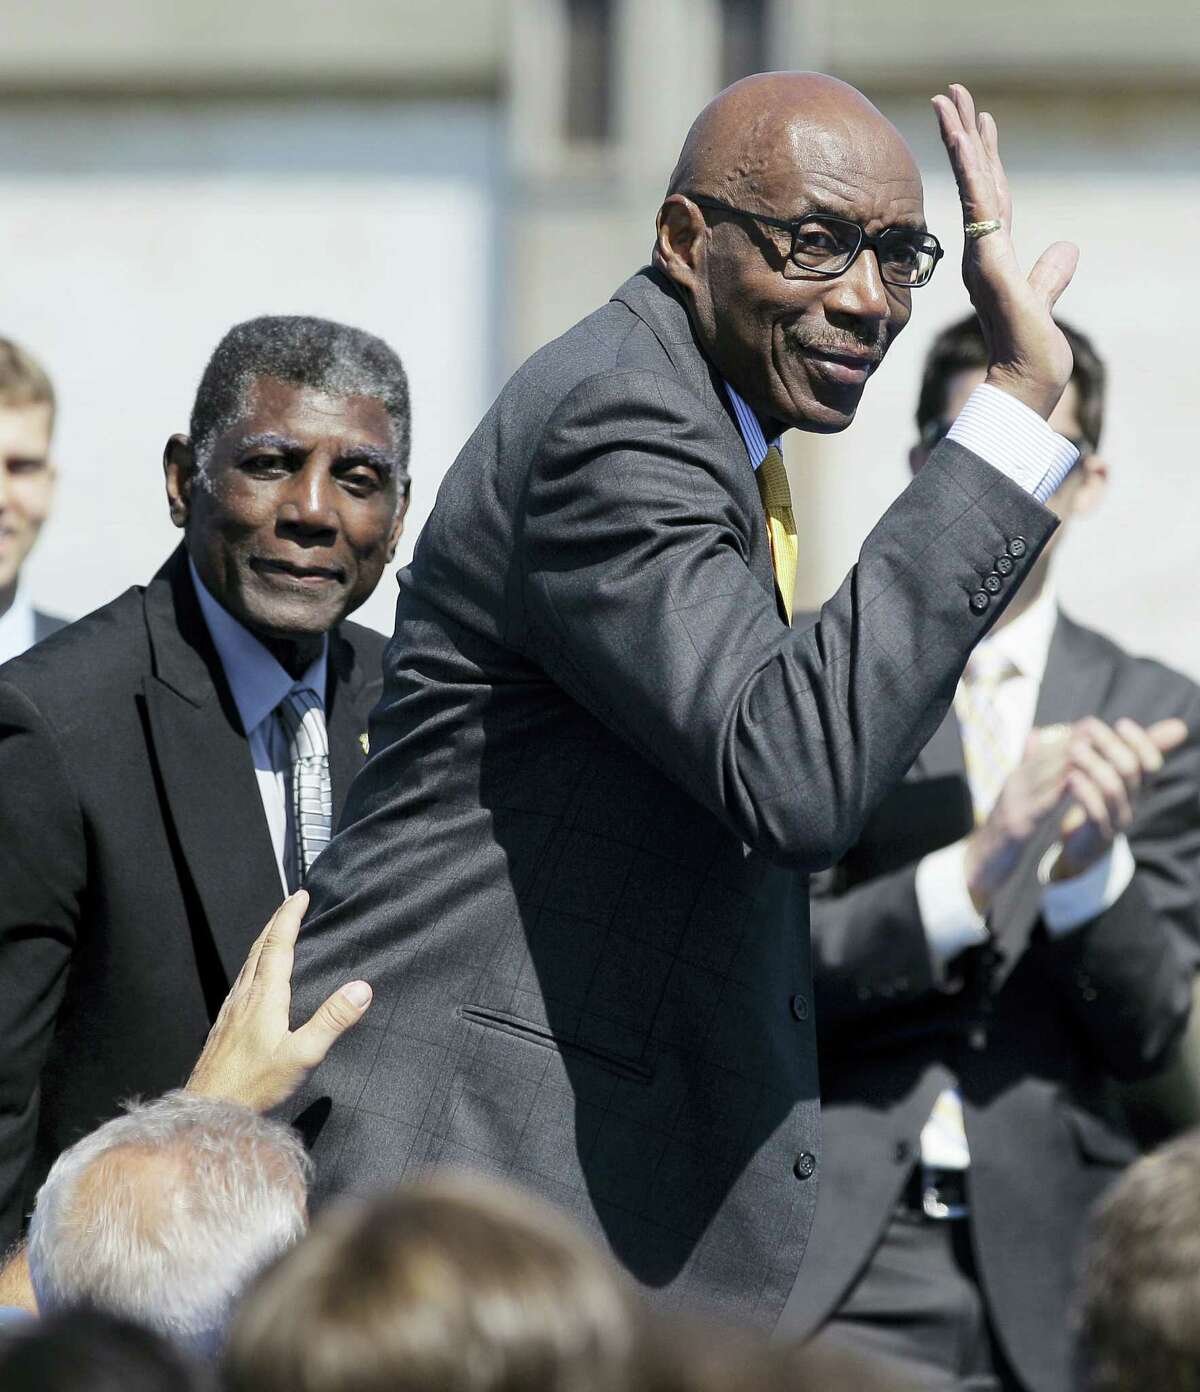 Golden State Warriors great Nate Thurmond waves during an announcement in San Francisco in 2012.